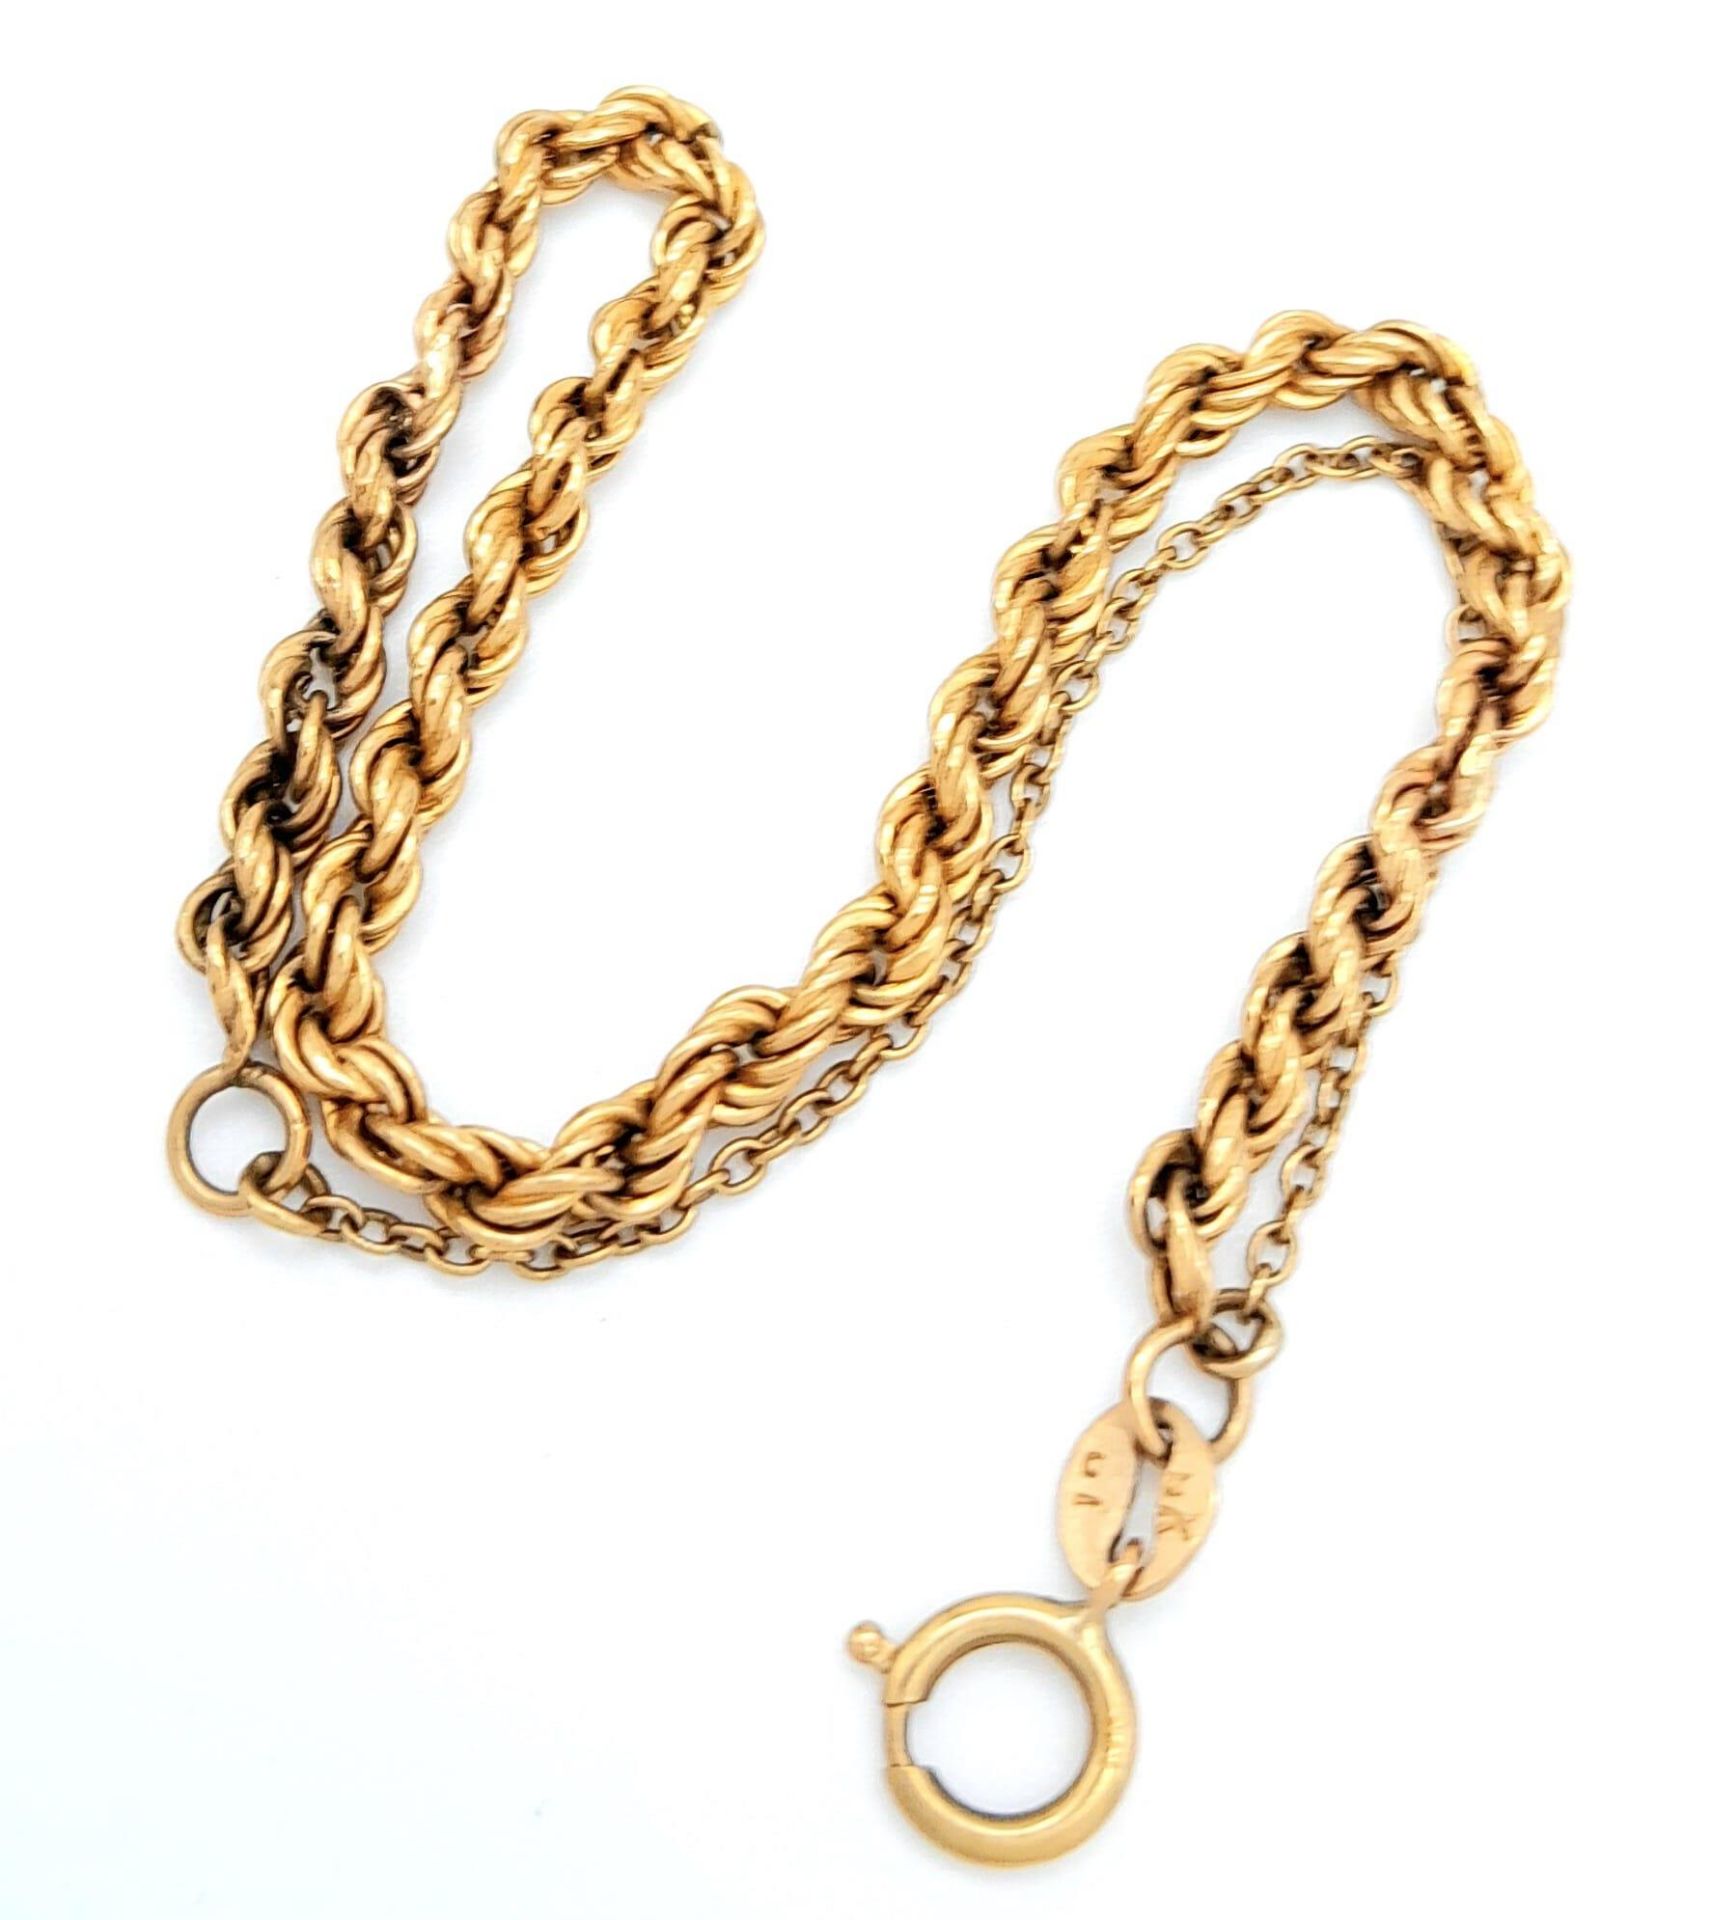 A 9K Yellow Gold Rope Bracelet with Safety Chain. 17.5cm length, 2.5g weight. Ref: SC 7070 - Image 3 of 4